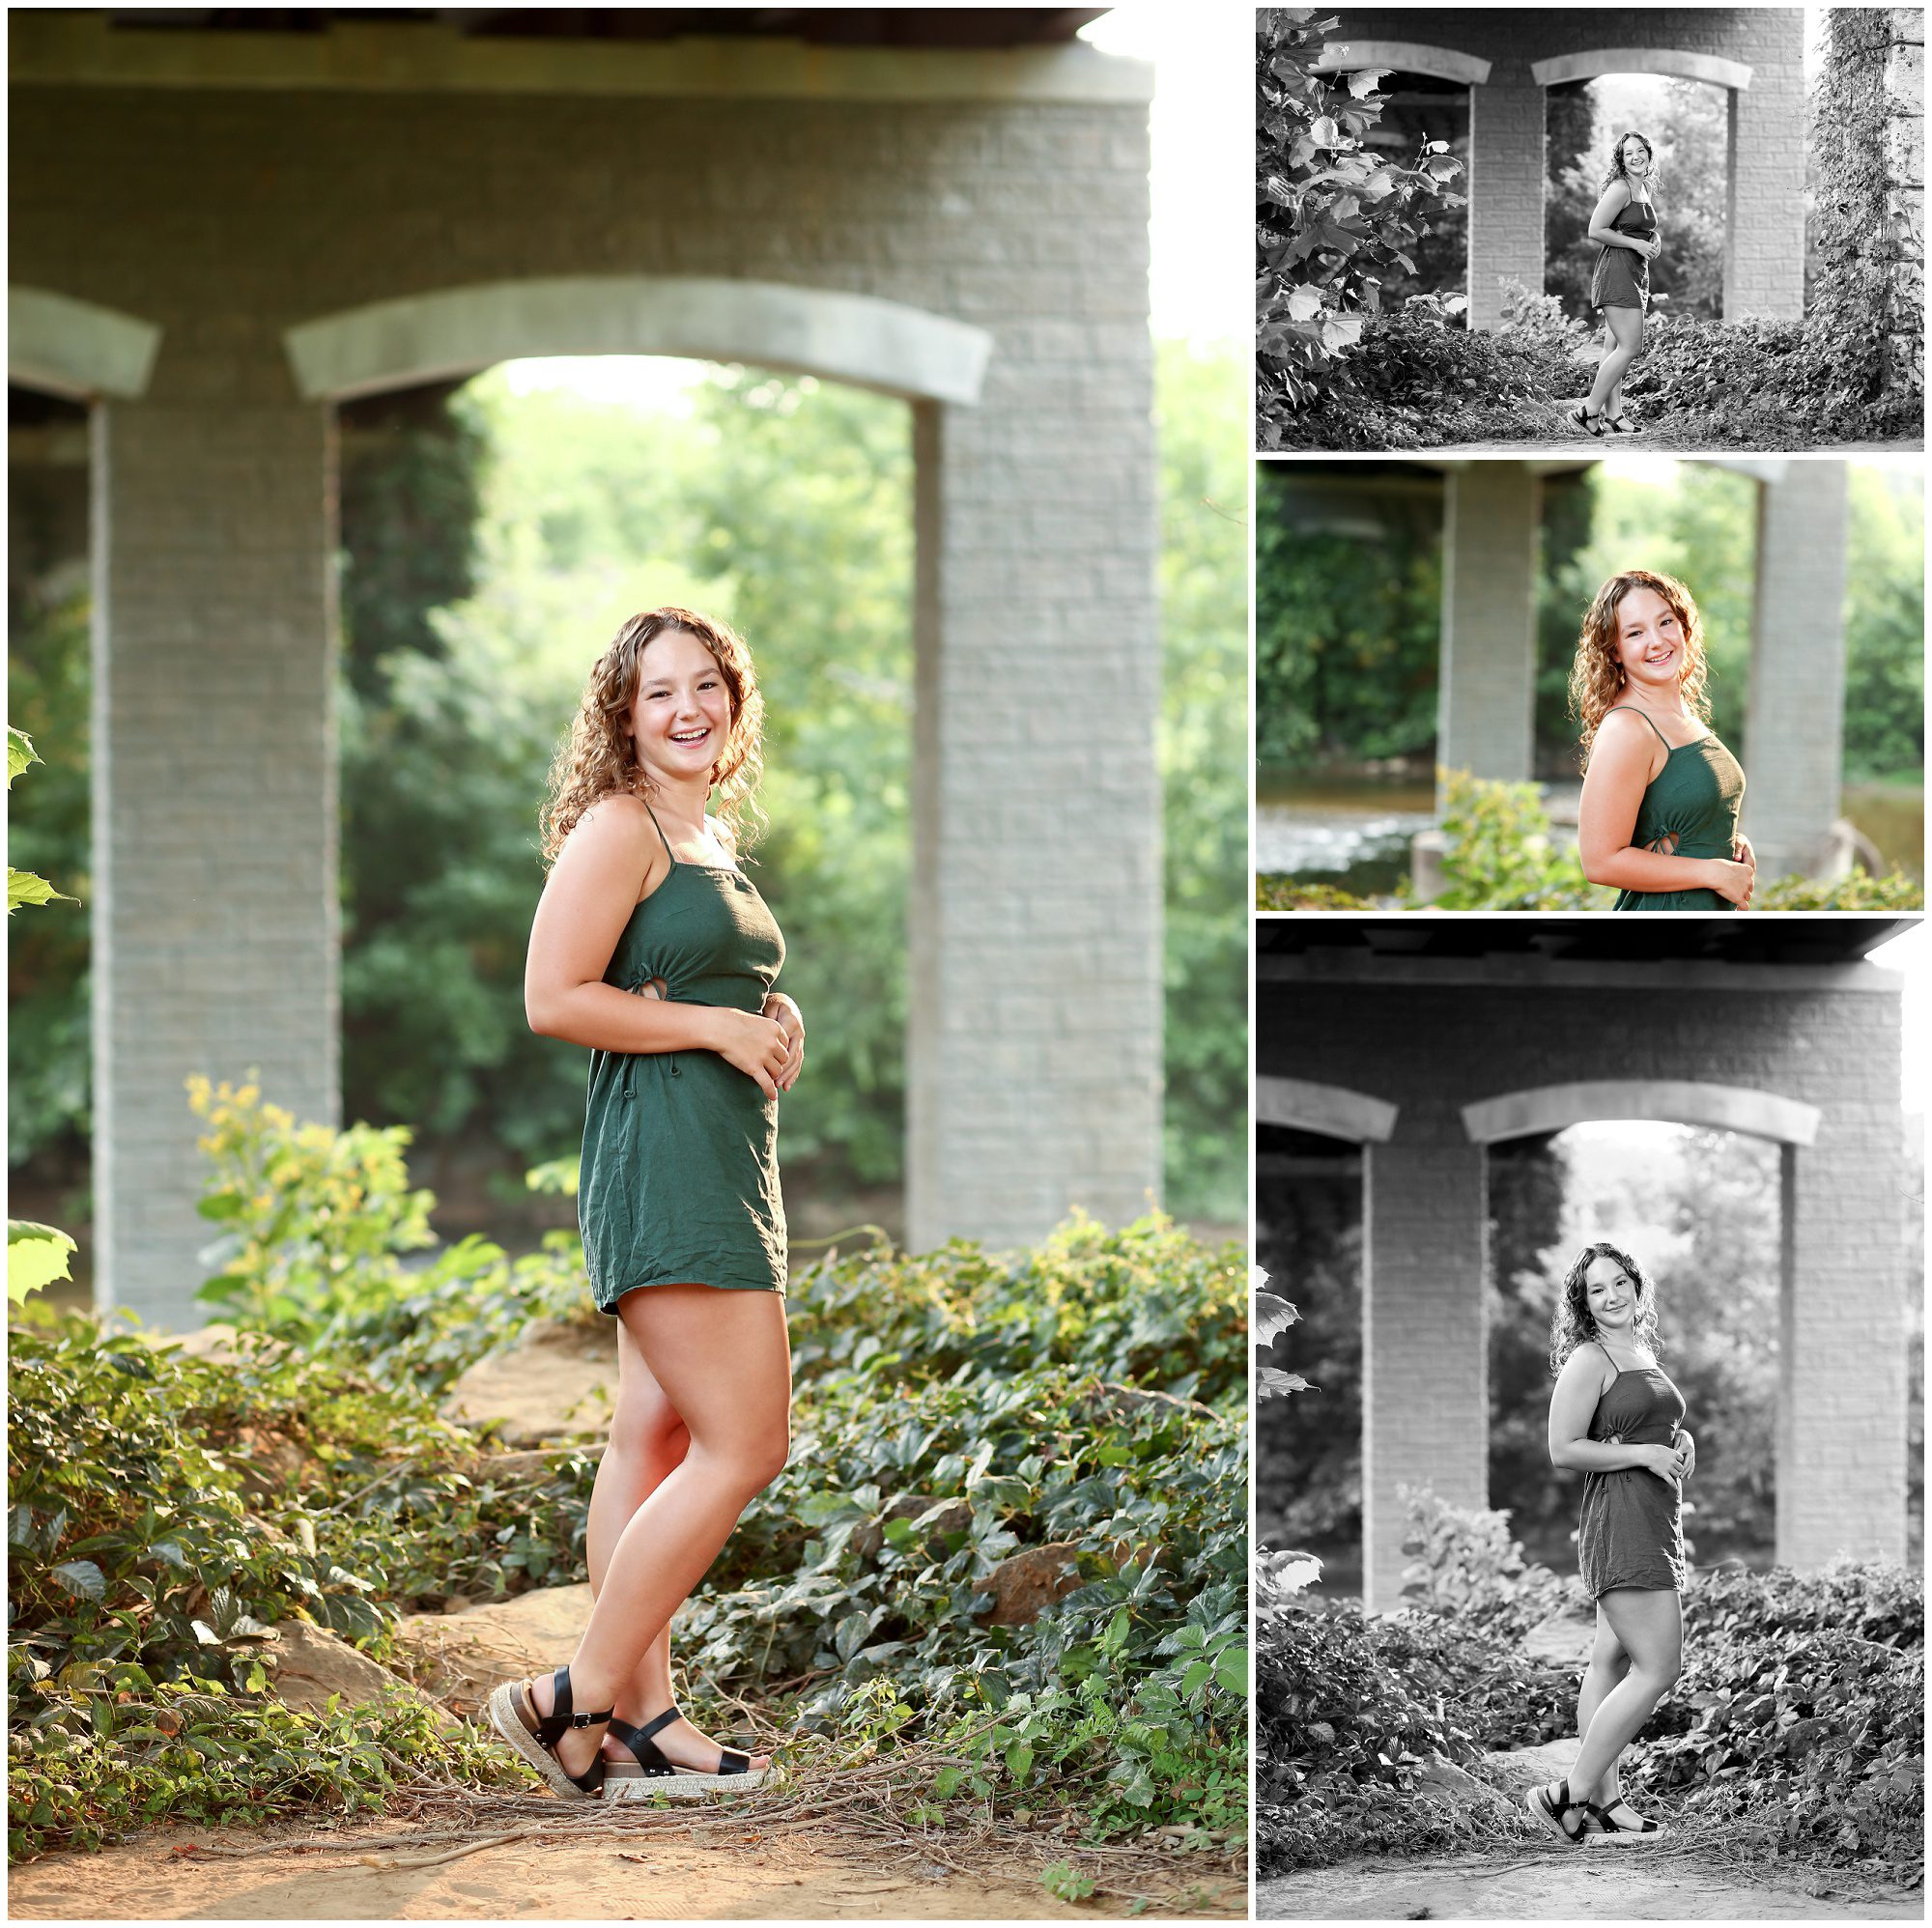 Fluvanna County High School Senior Summer Portraits Cville Charlottesville photographer pictures photoshoot session pictures